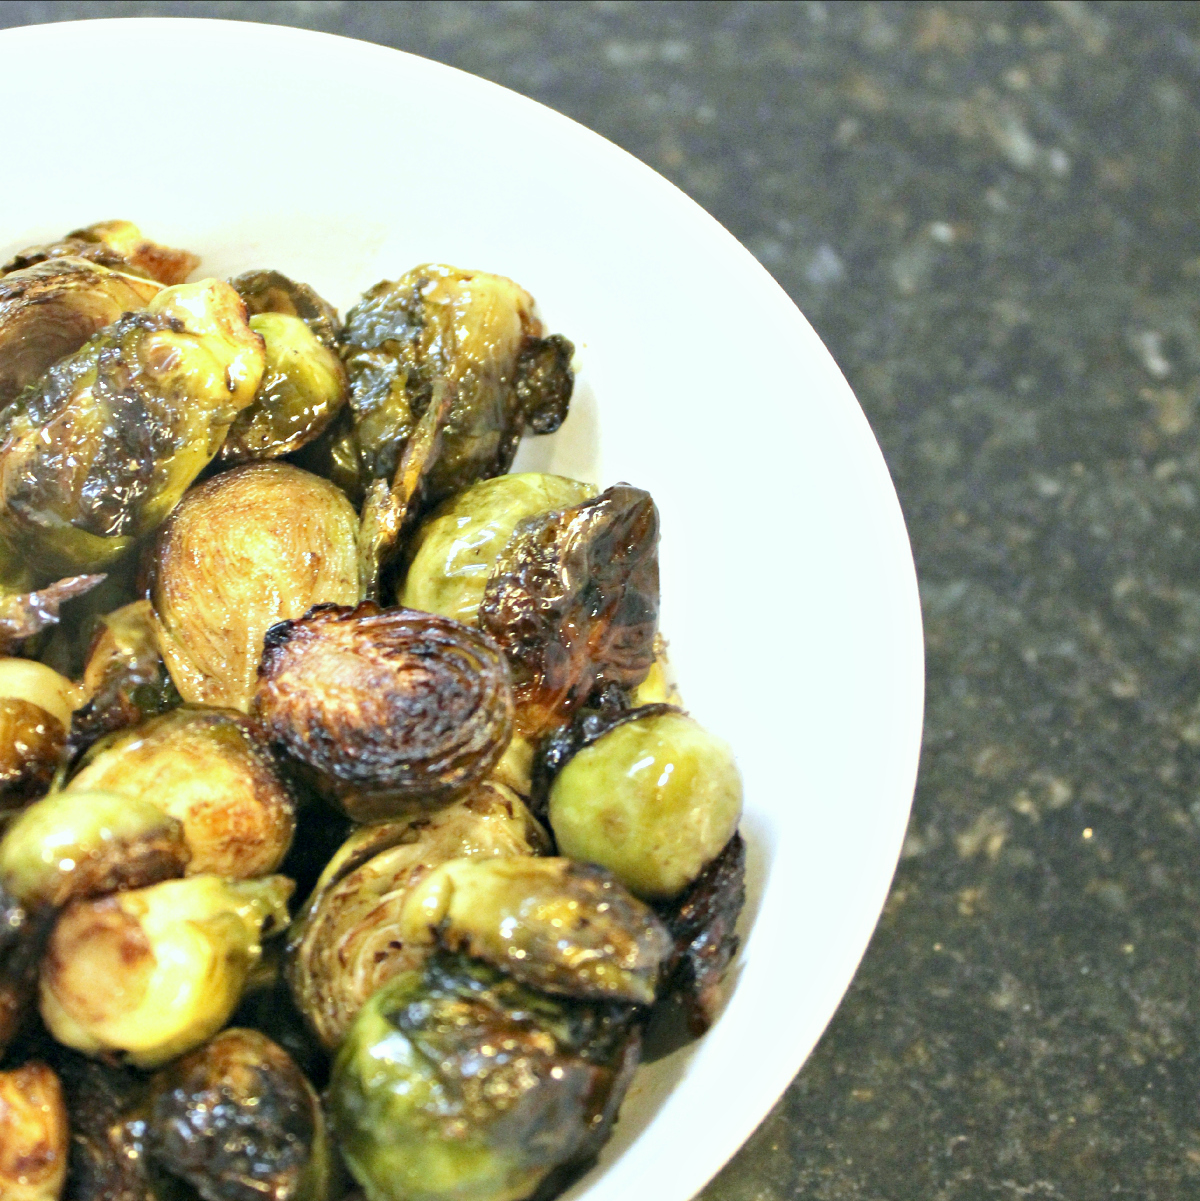 Delicious roasted brussels sprouts with balsamic vinegar and olive oil